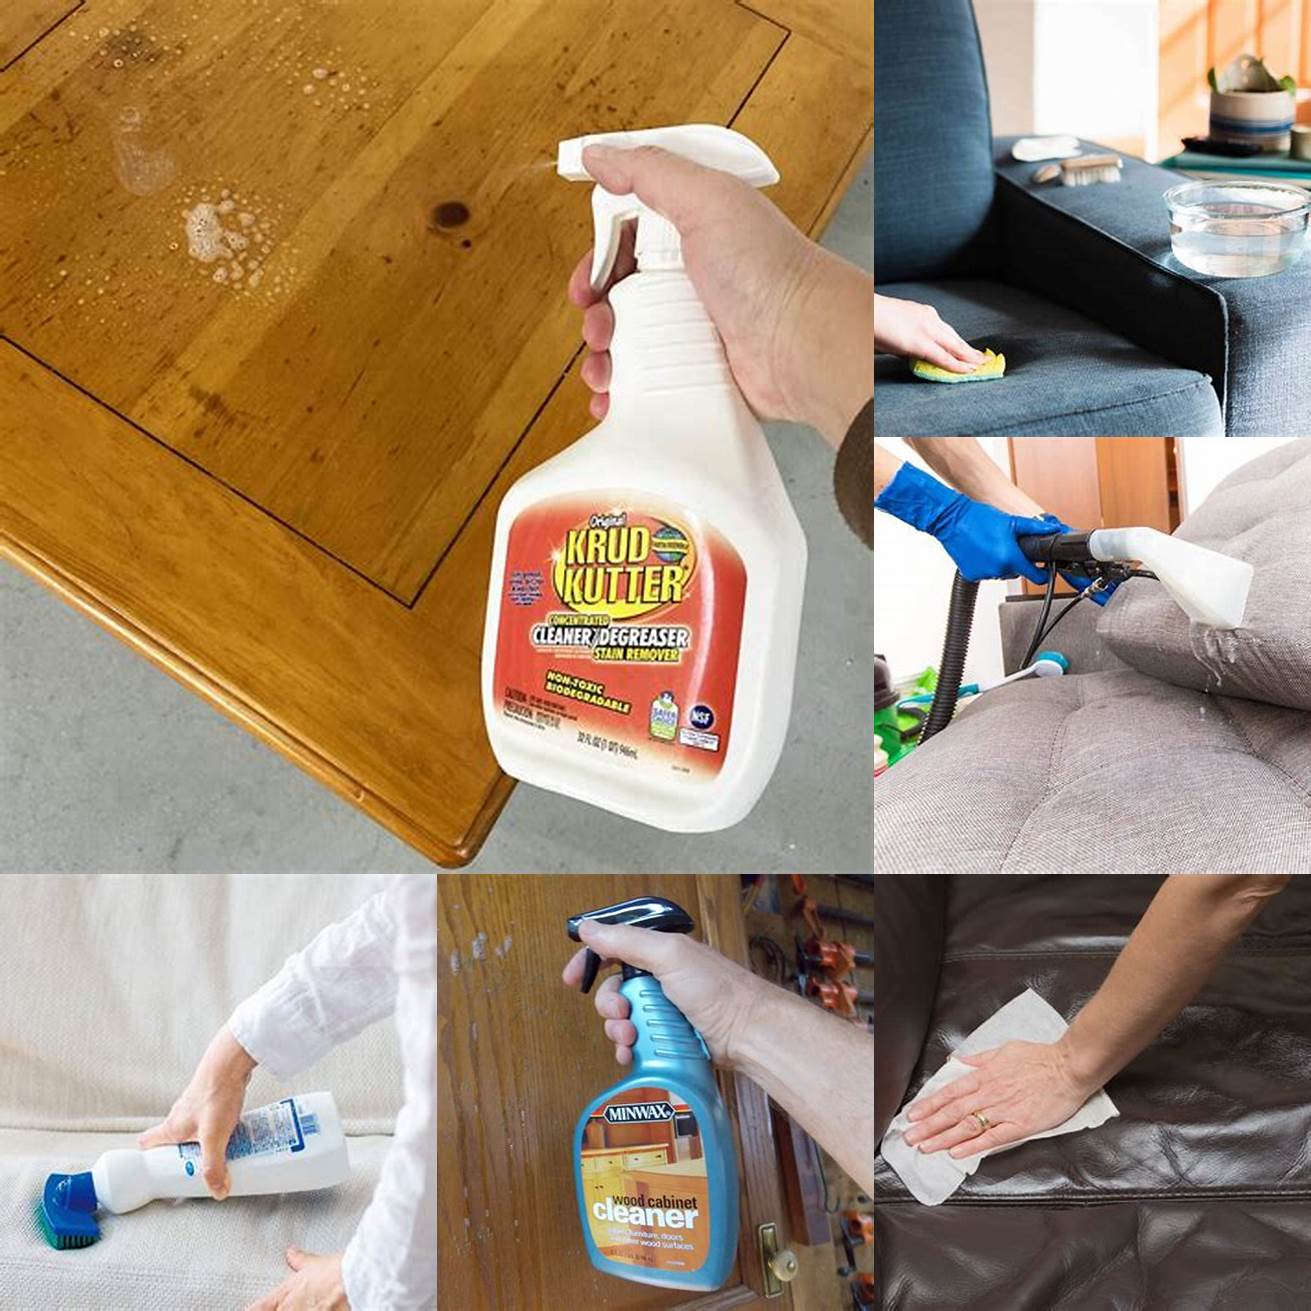 Test the Cleaning Solution